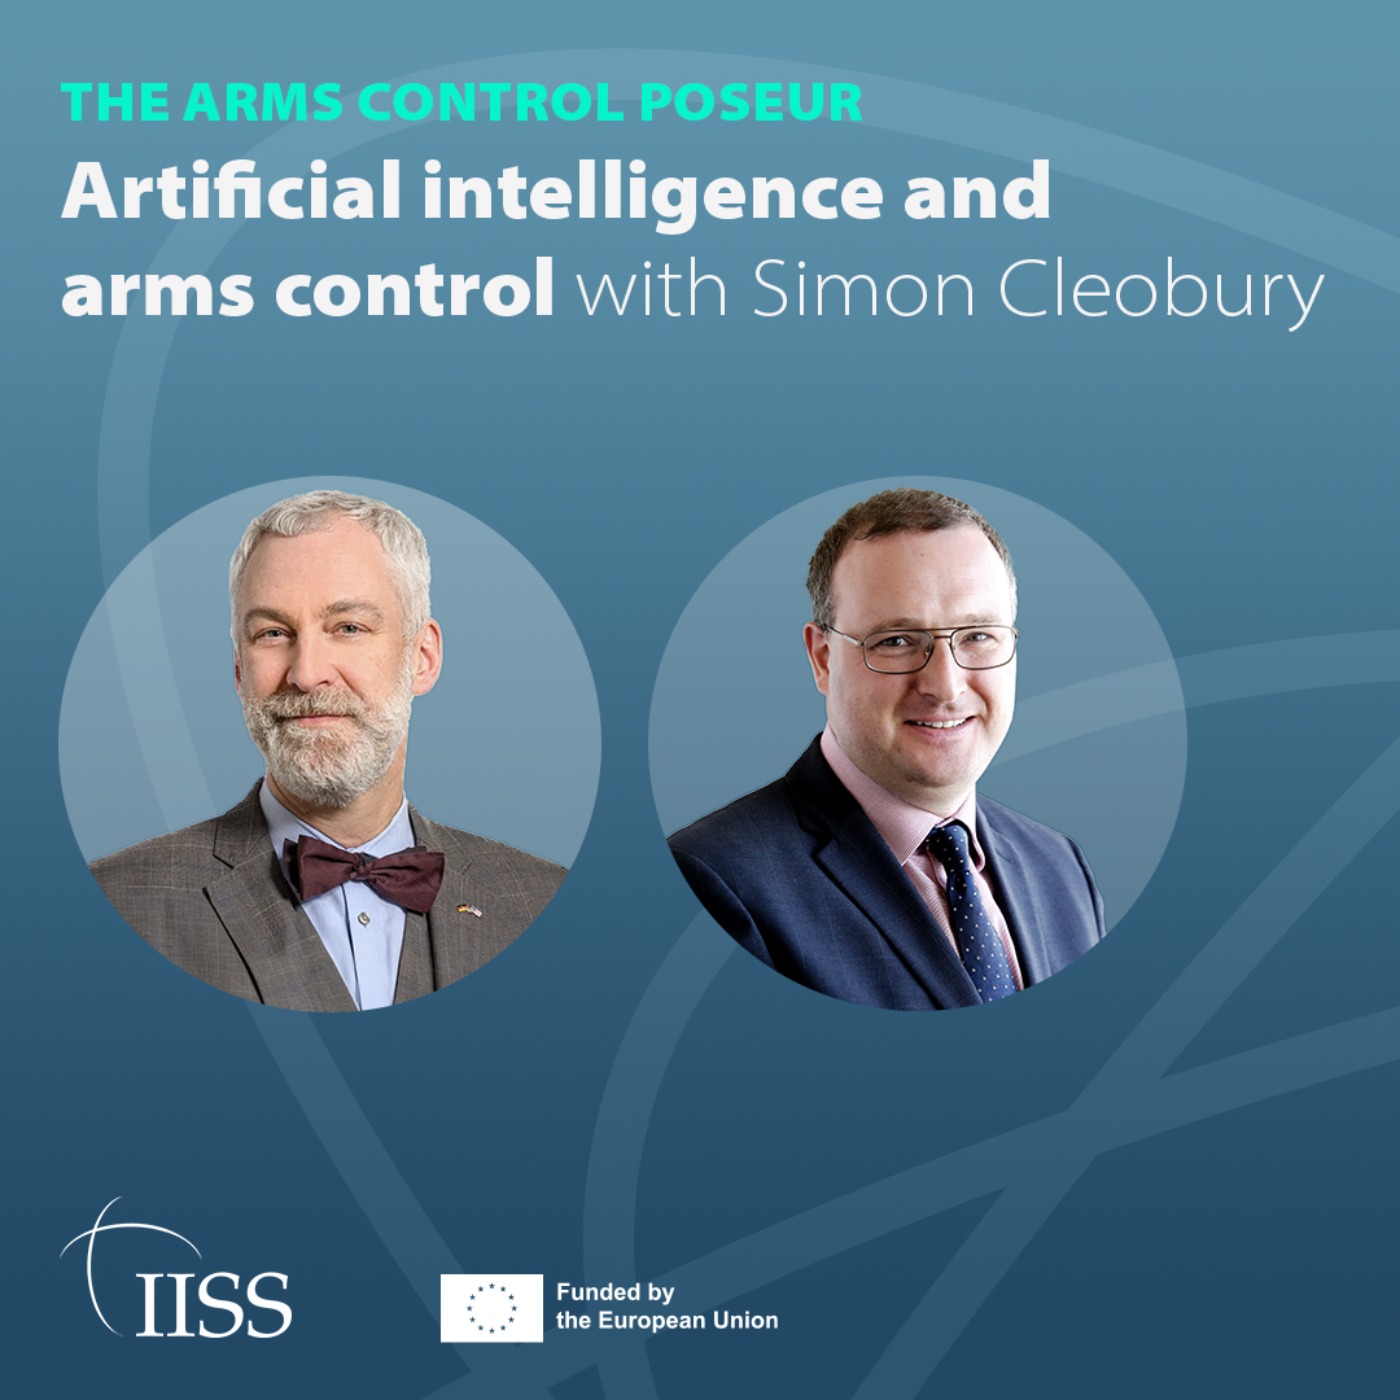 Artificial intelligence and arms control with Simon Cleobury